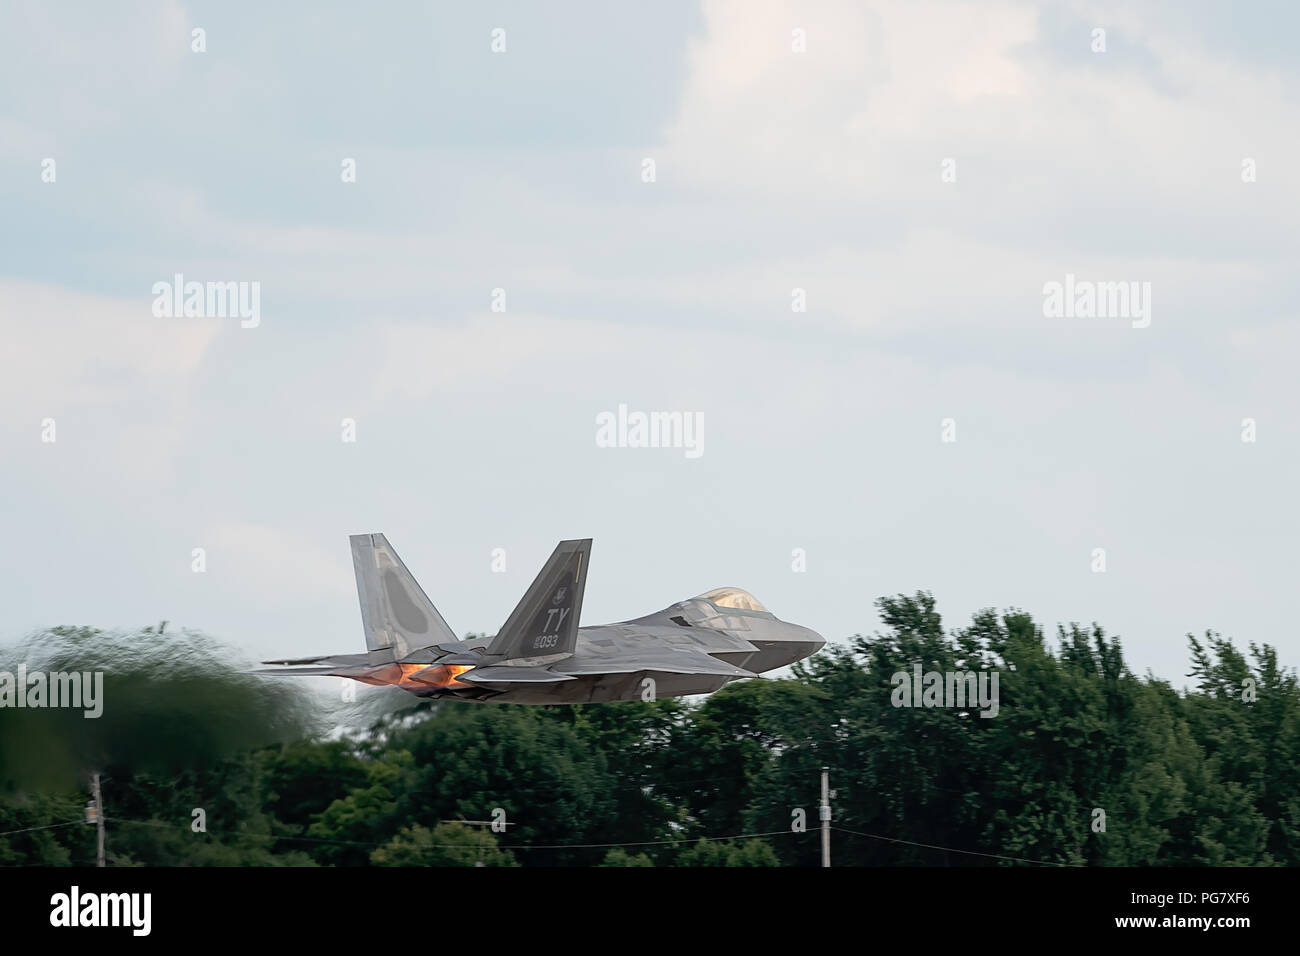 Oshkosh, WI - 28 July 2018:  A F-22 from the United States Air Force takes off with full afterburners Stock Photo